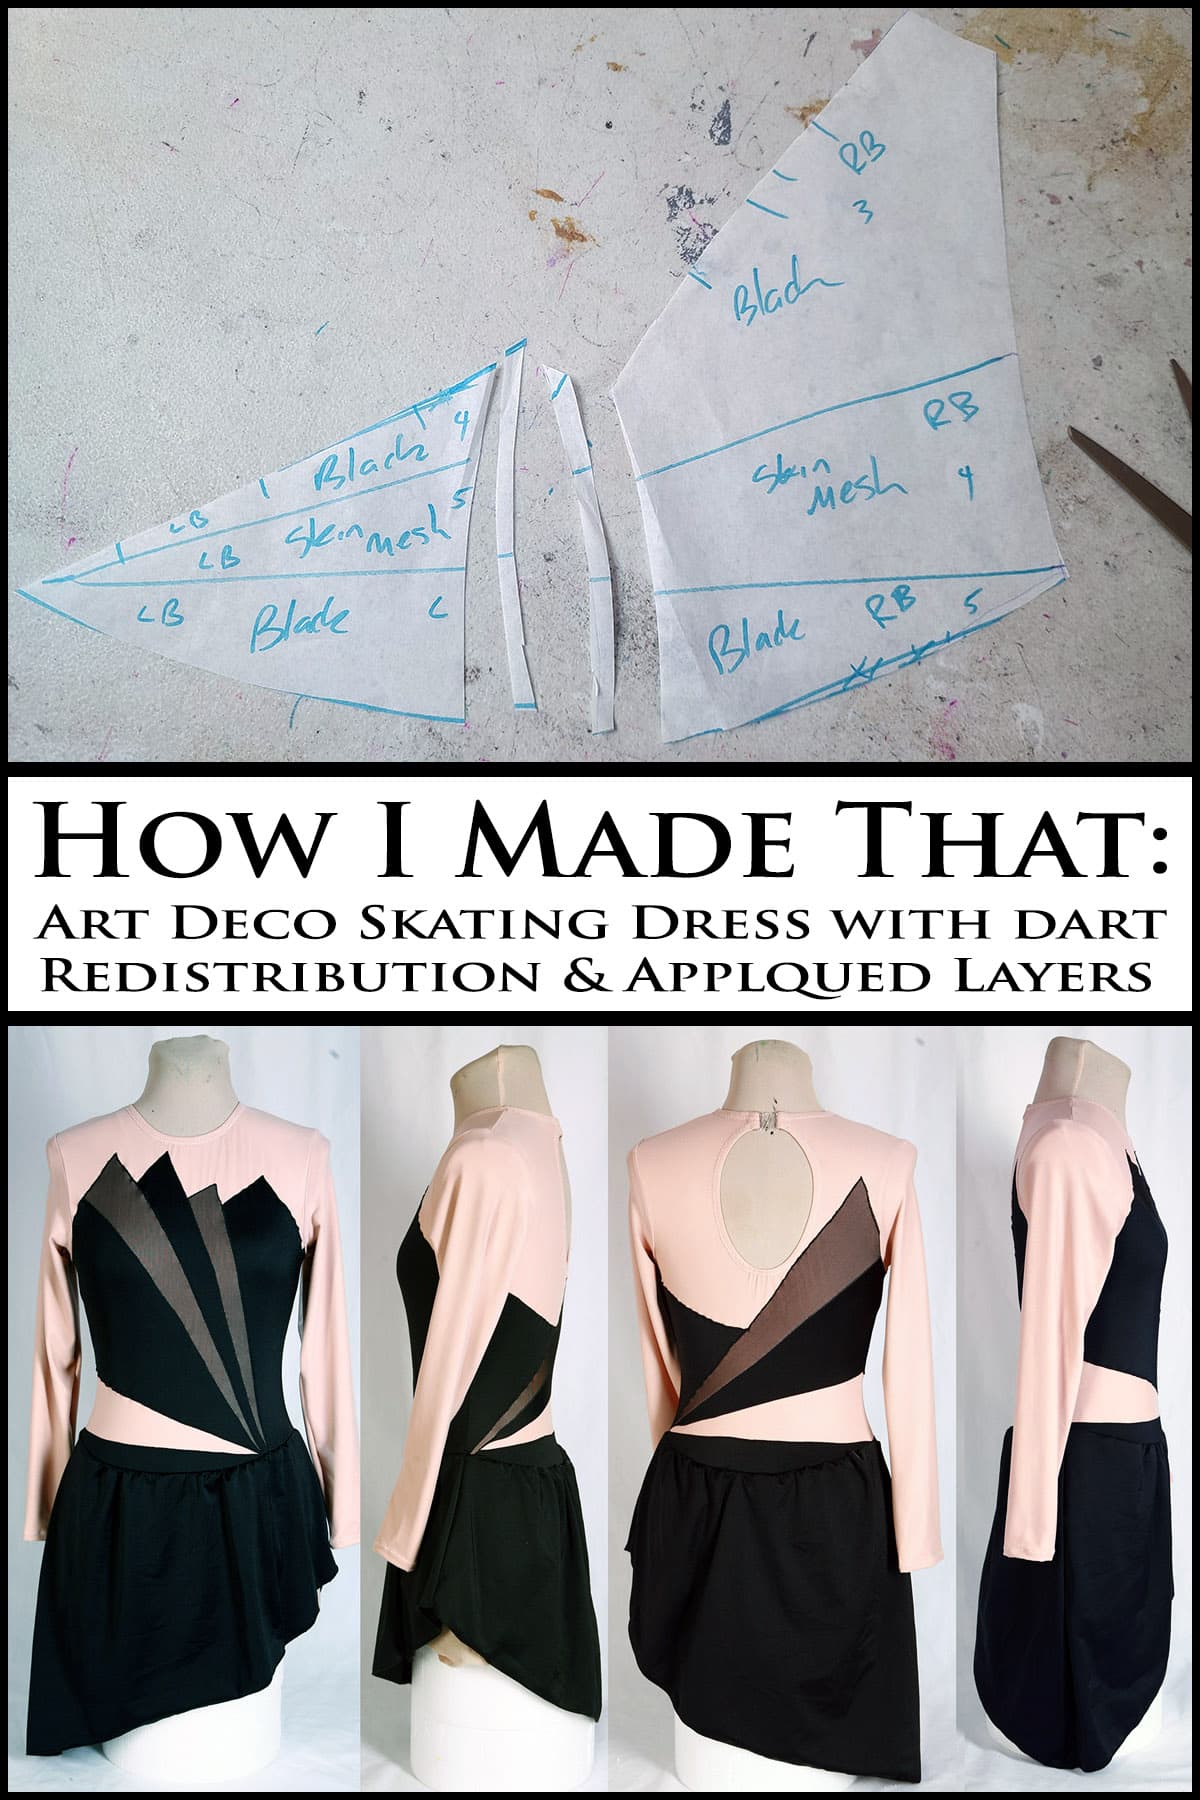 A compilation image showing a chopped up bodice pattern and a finished at deco inspired black figure skating dress.